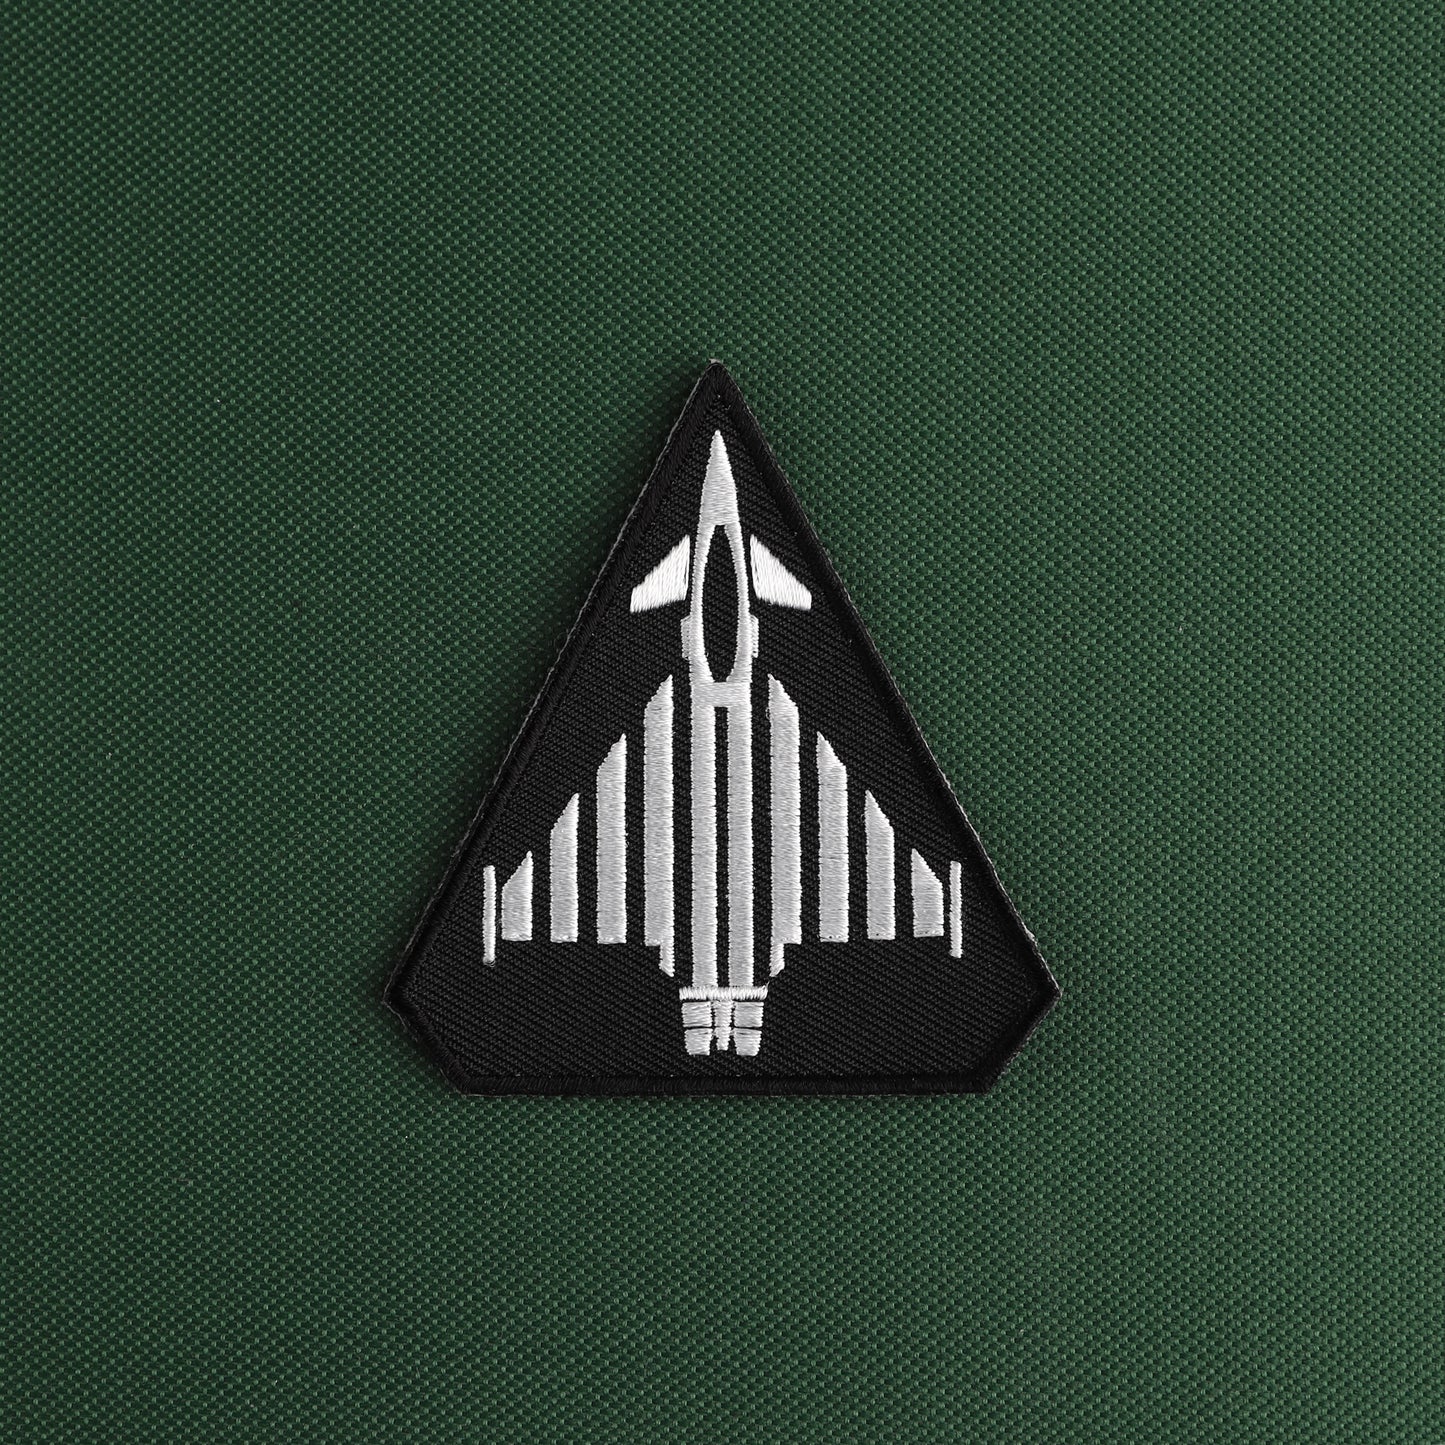 RAF Typhoon Embroidered Patch